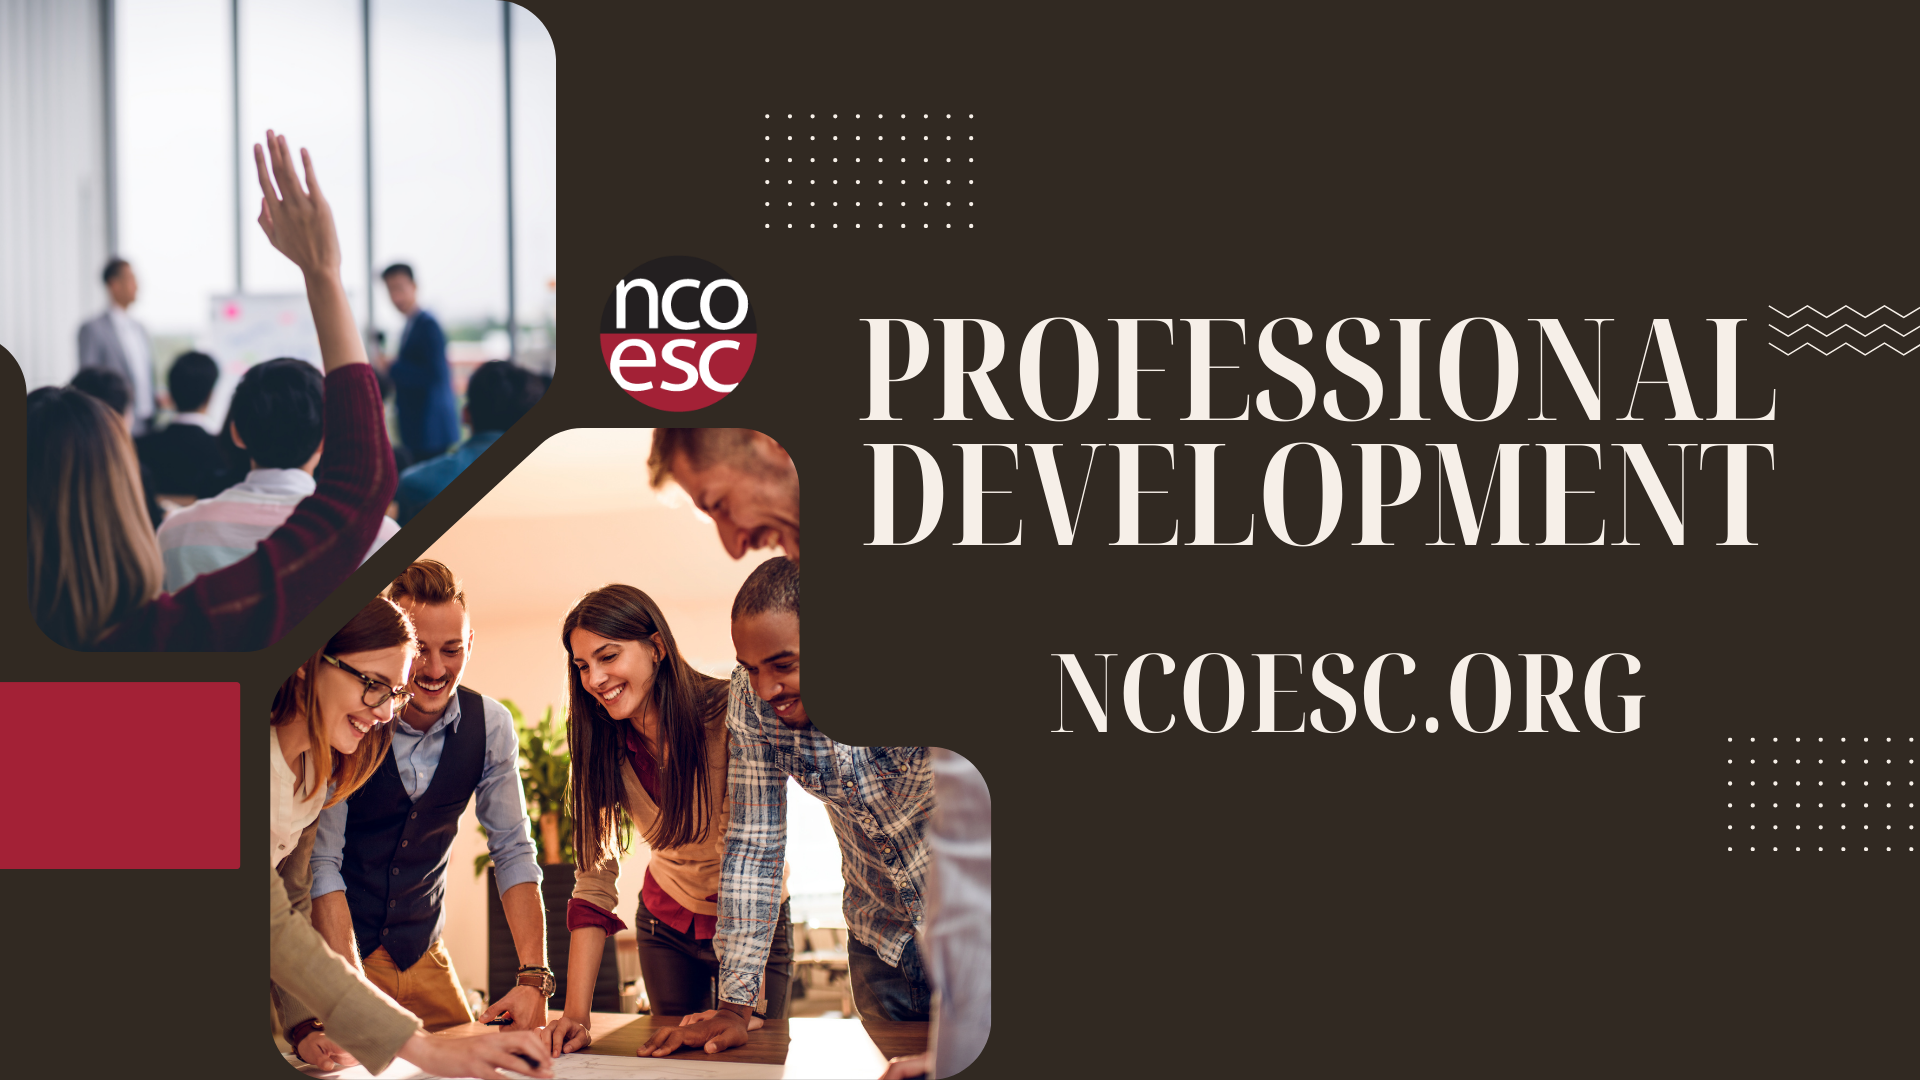 Professional Development: Visit ncoesc.org for a full list of PD events